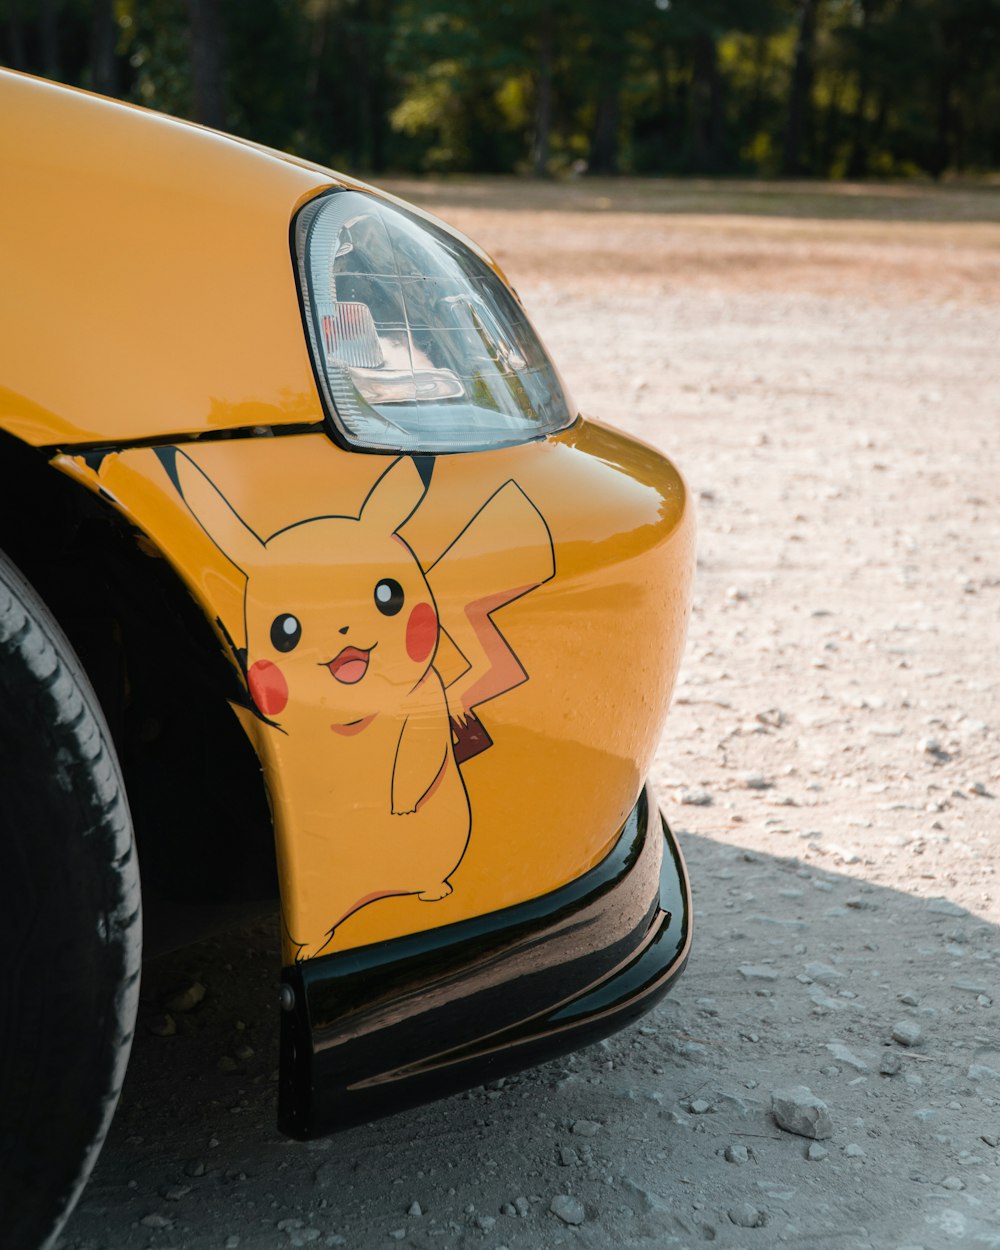 a close up of a car with a pikachu painted on it